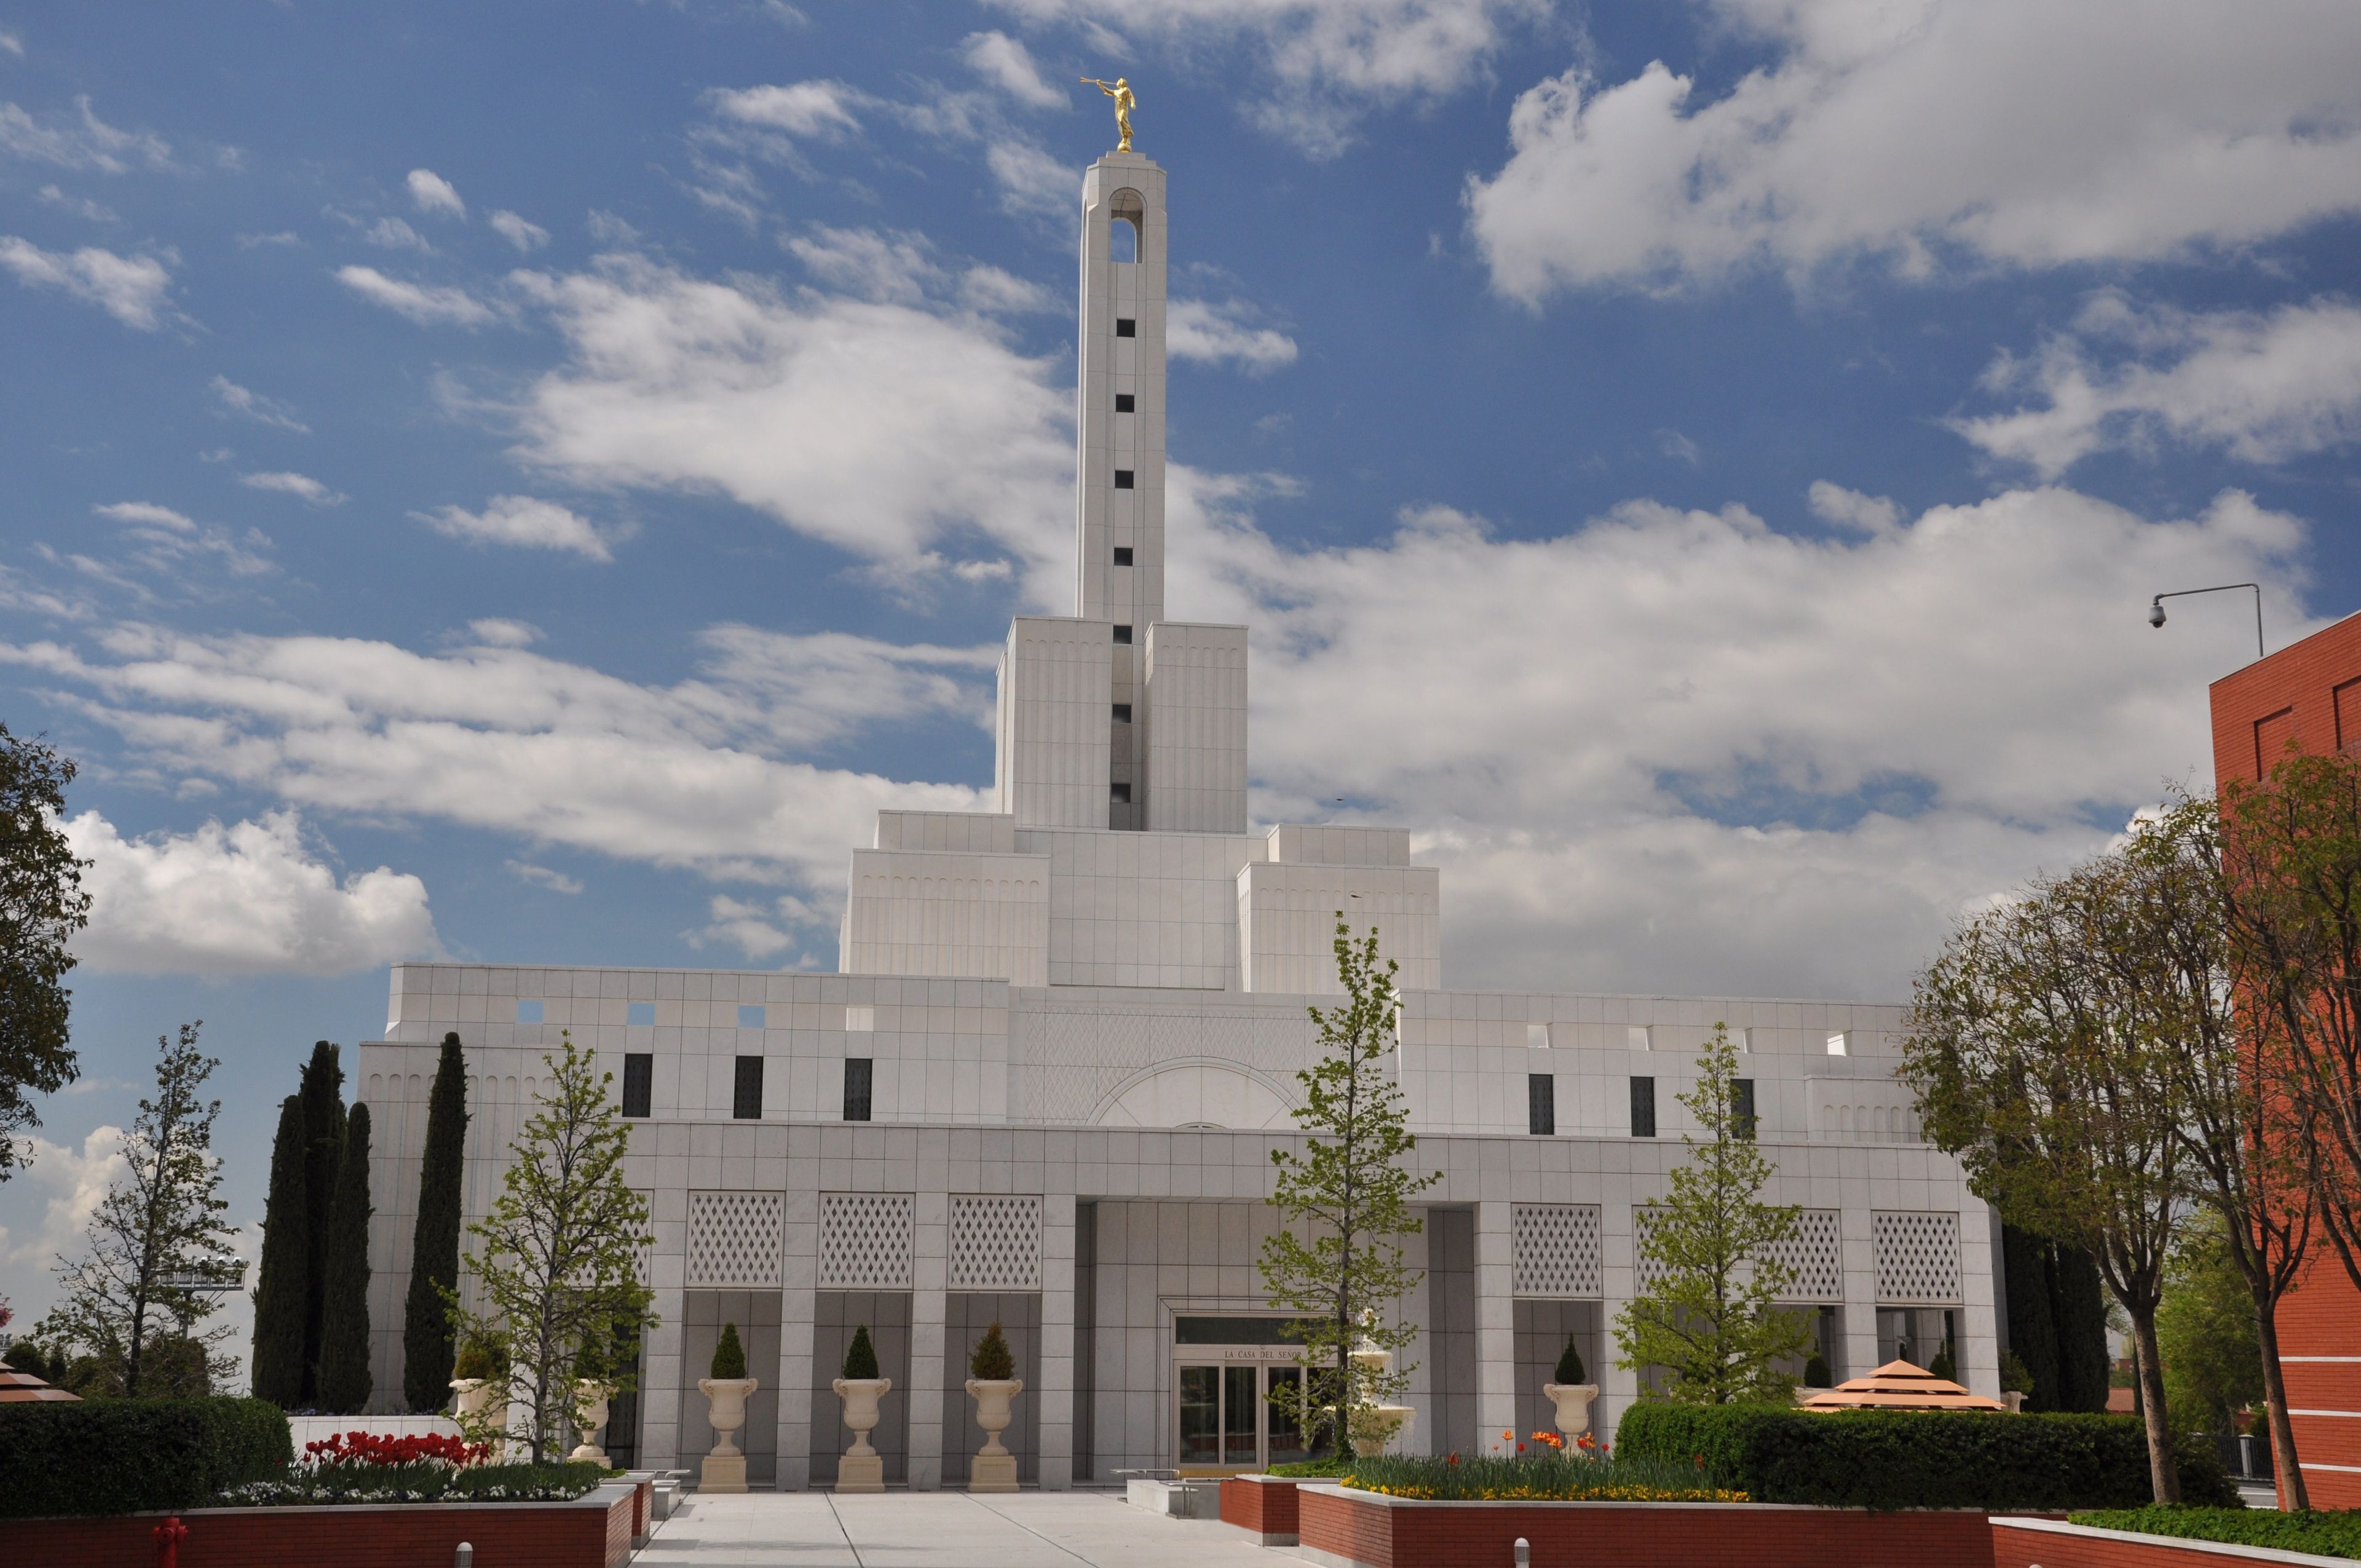 The Madrid Spain Temple entrance, including scenery.